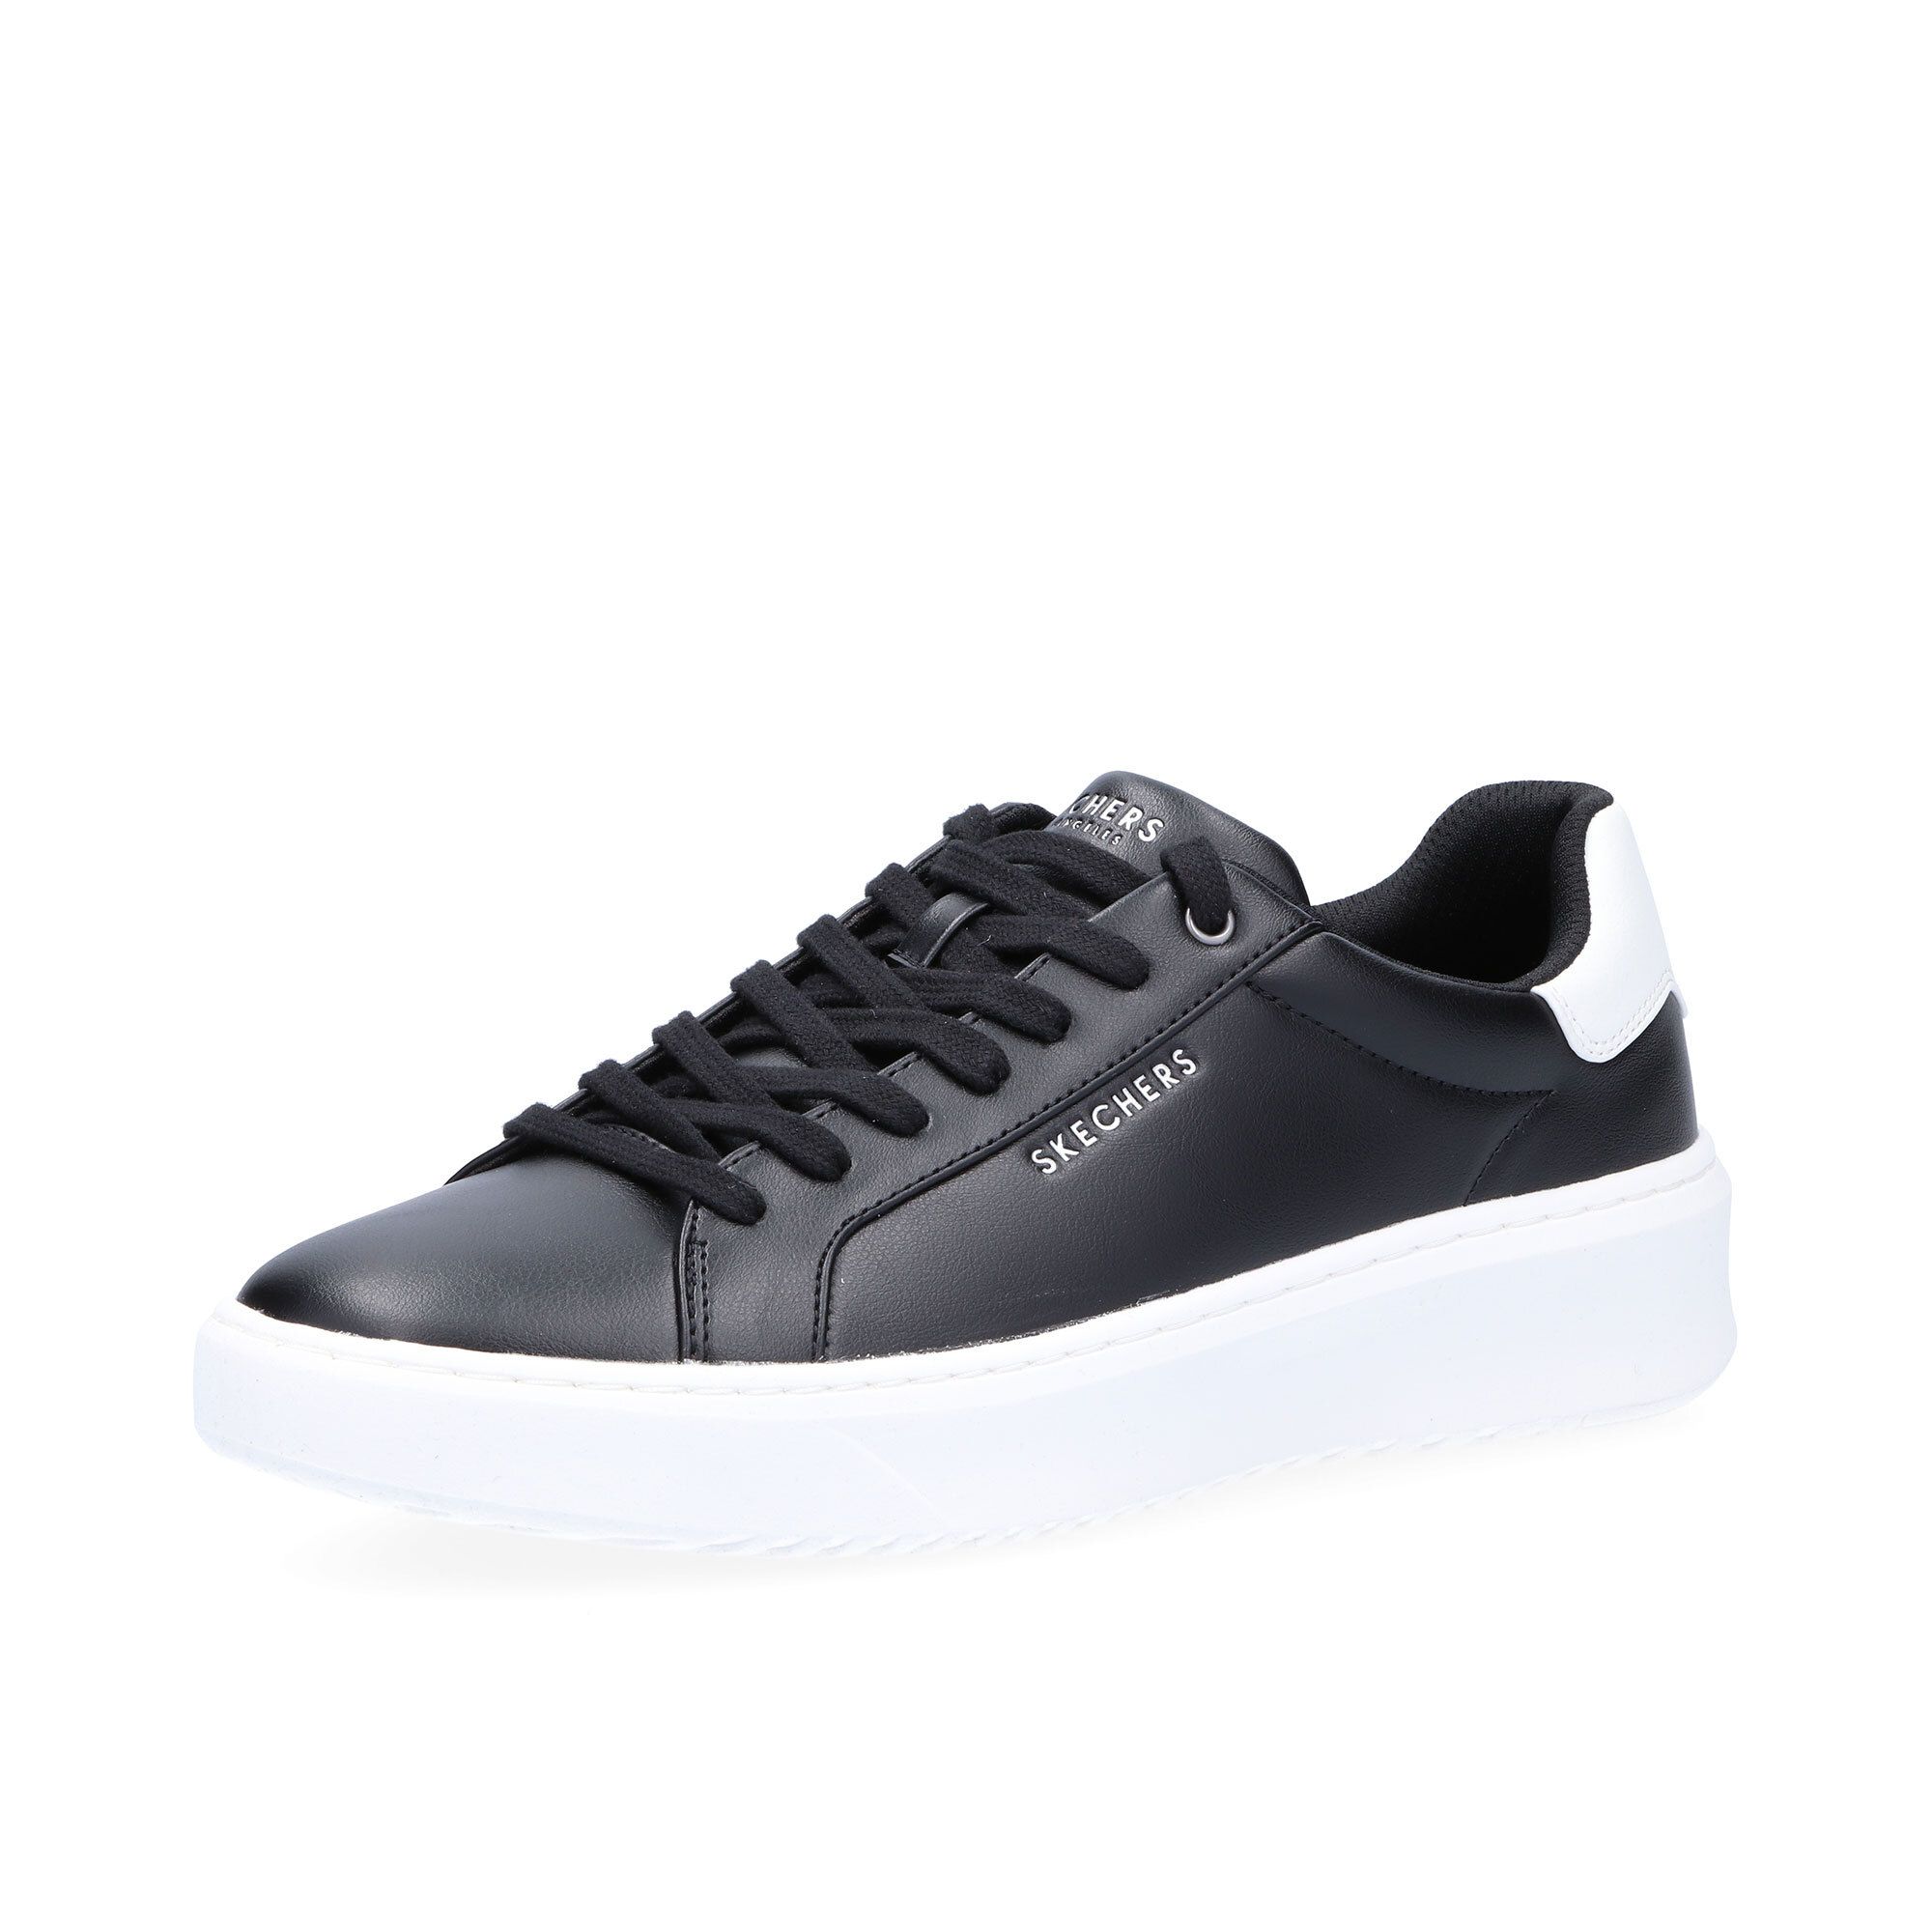 Image of Sneakers uomo Cout Break con soletta Air Cooled Memory Foam